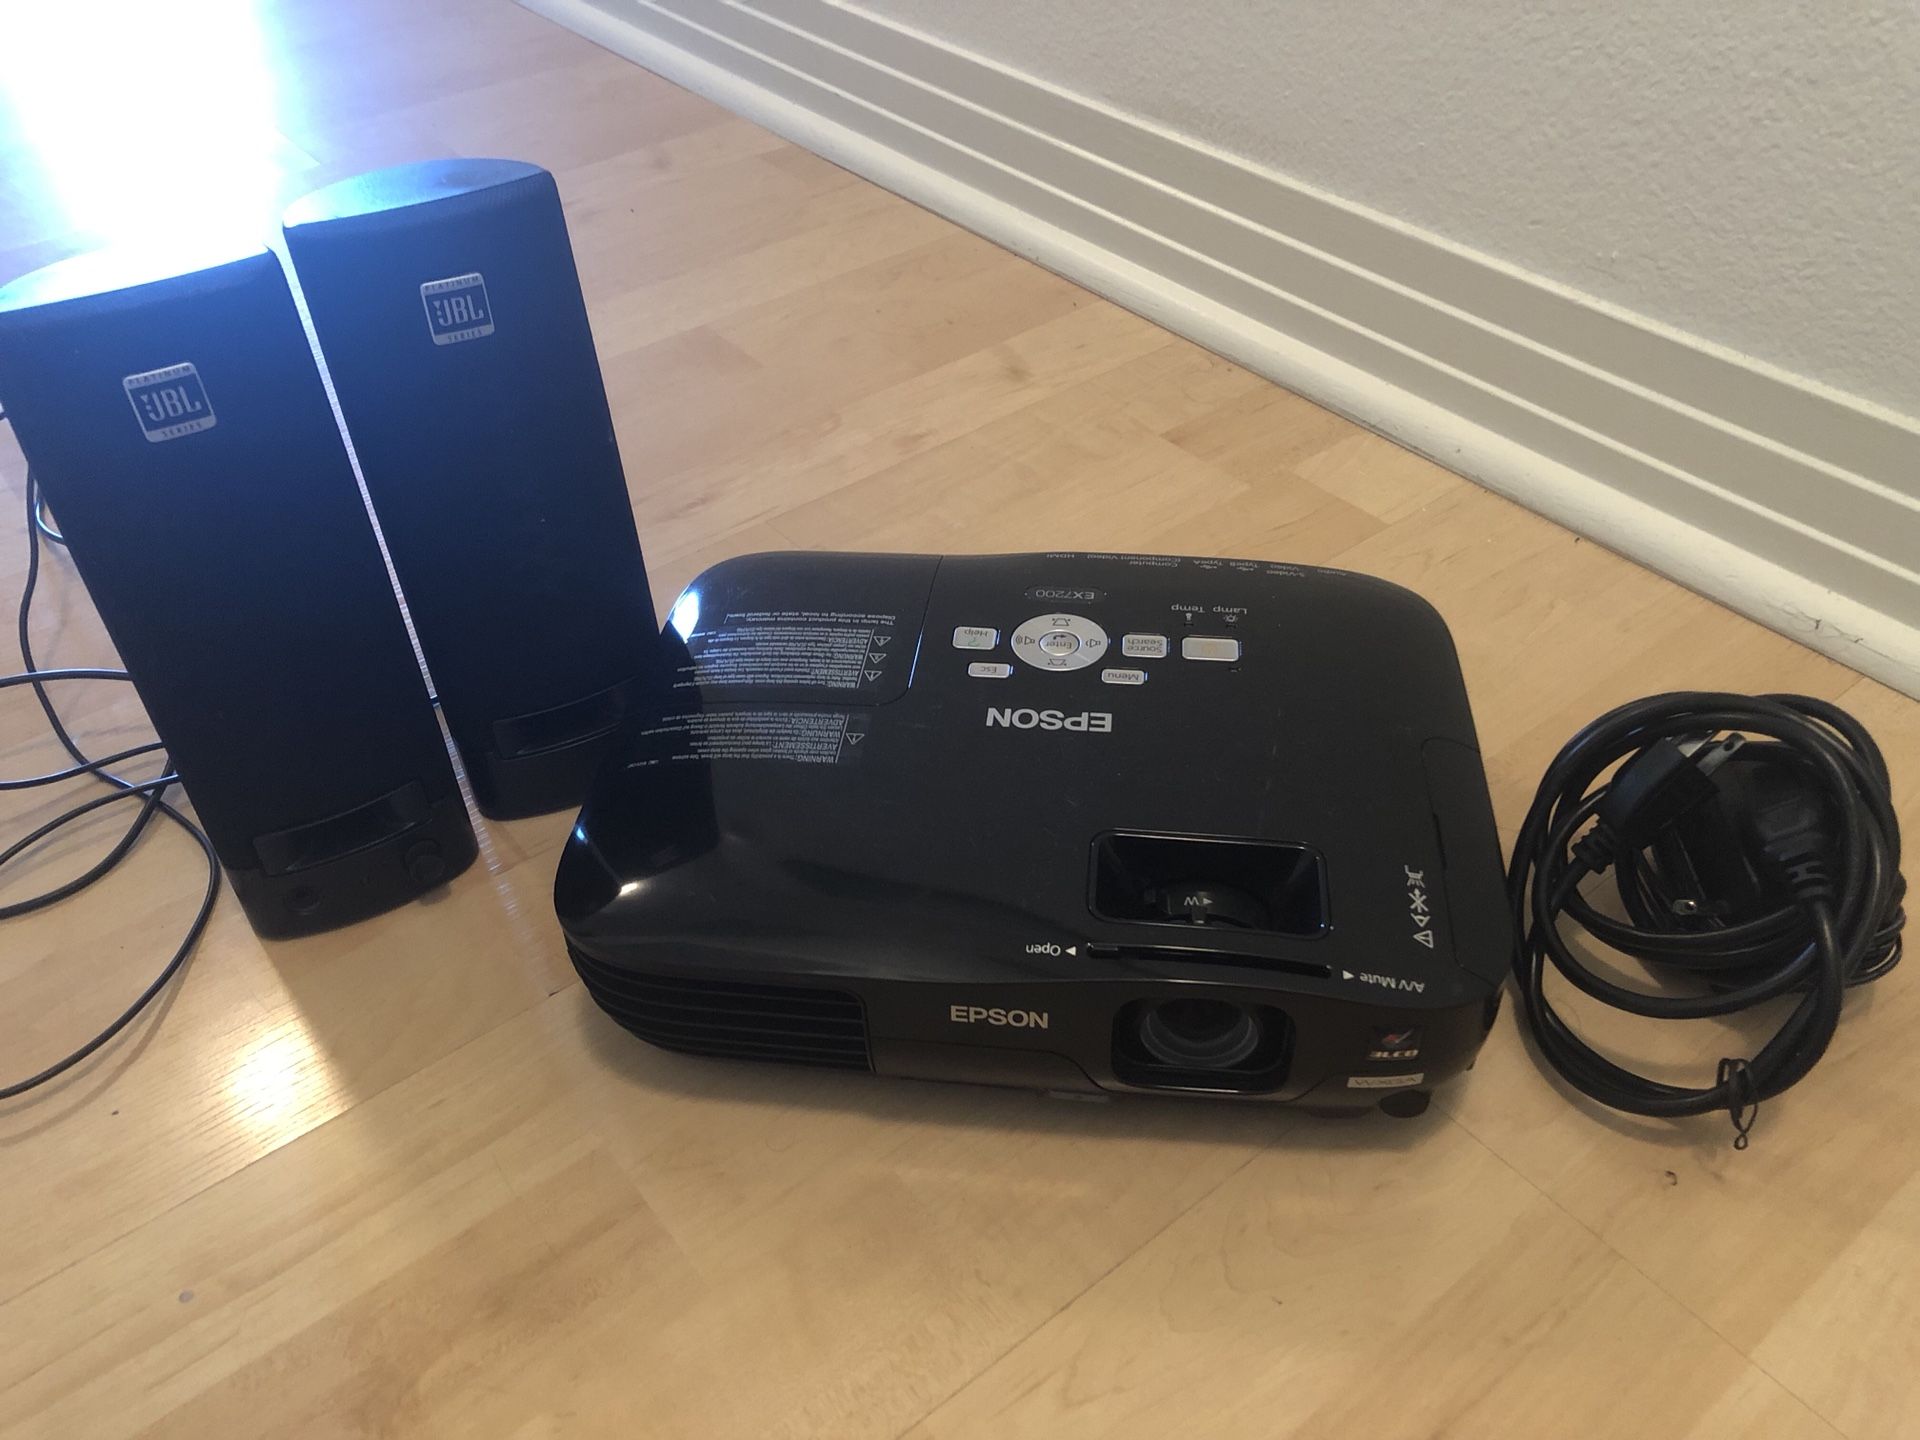 Epson Projector EX7200 with JBL Speakers and all cords